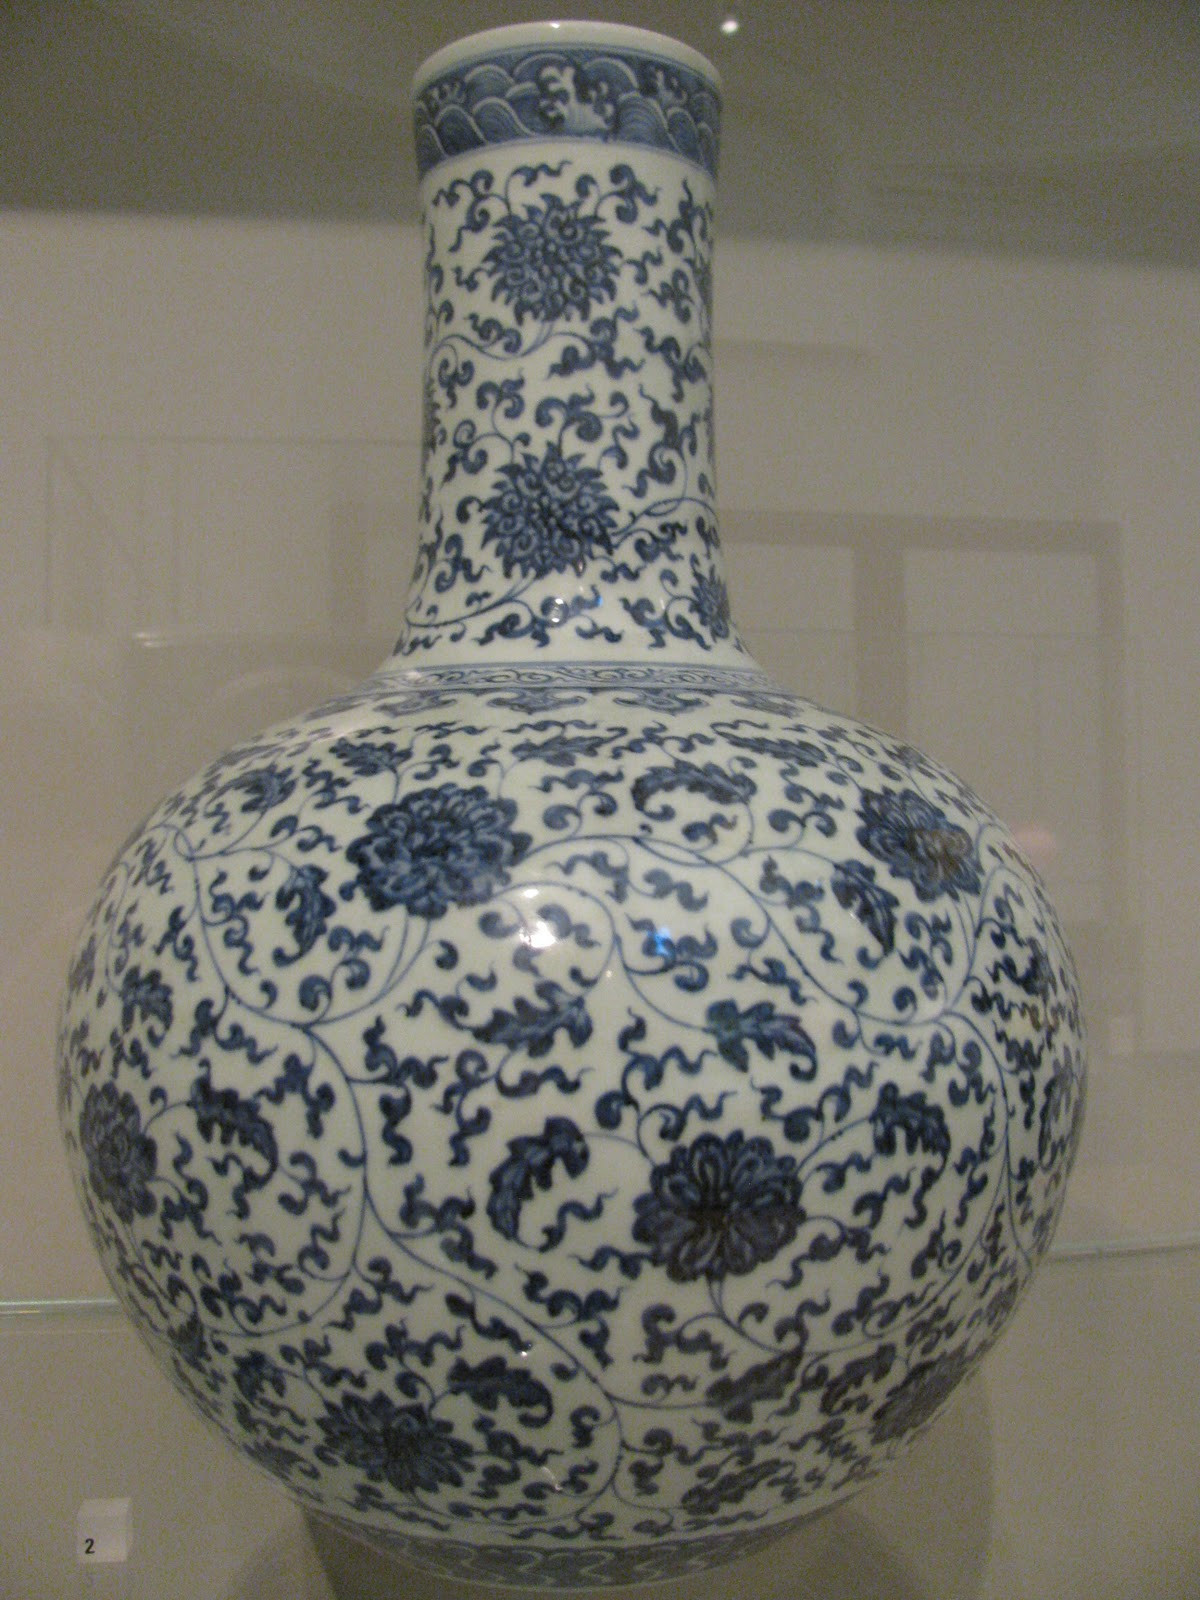 ai weiwei vase of picked by phds looking for ai weiwei at the v a in ai weiwei blue and white vase 1996 porcelain painted in underglaze cobalt blue jingdezhen china